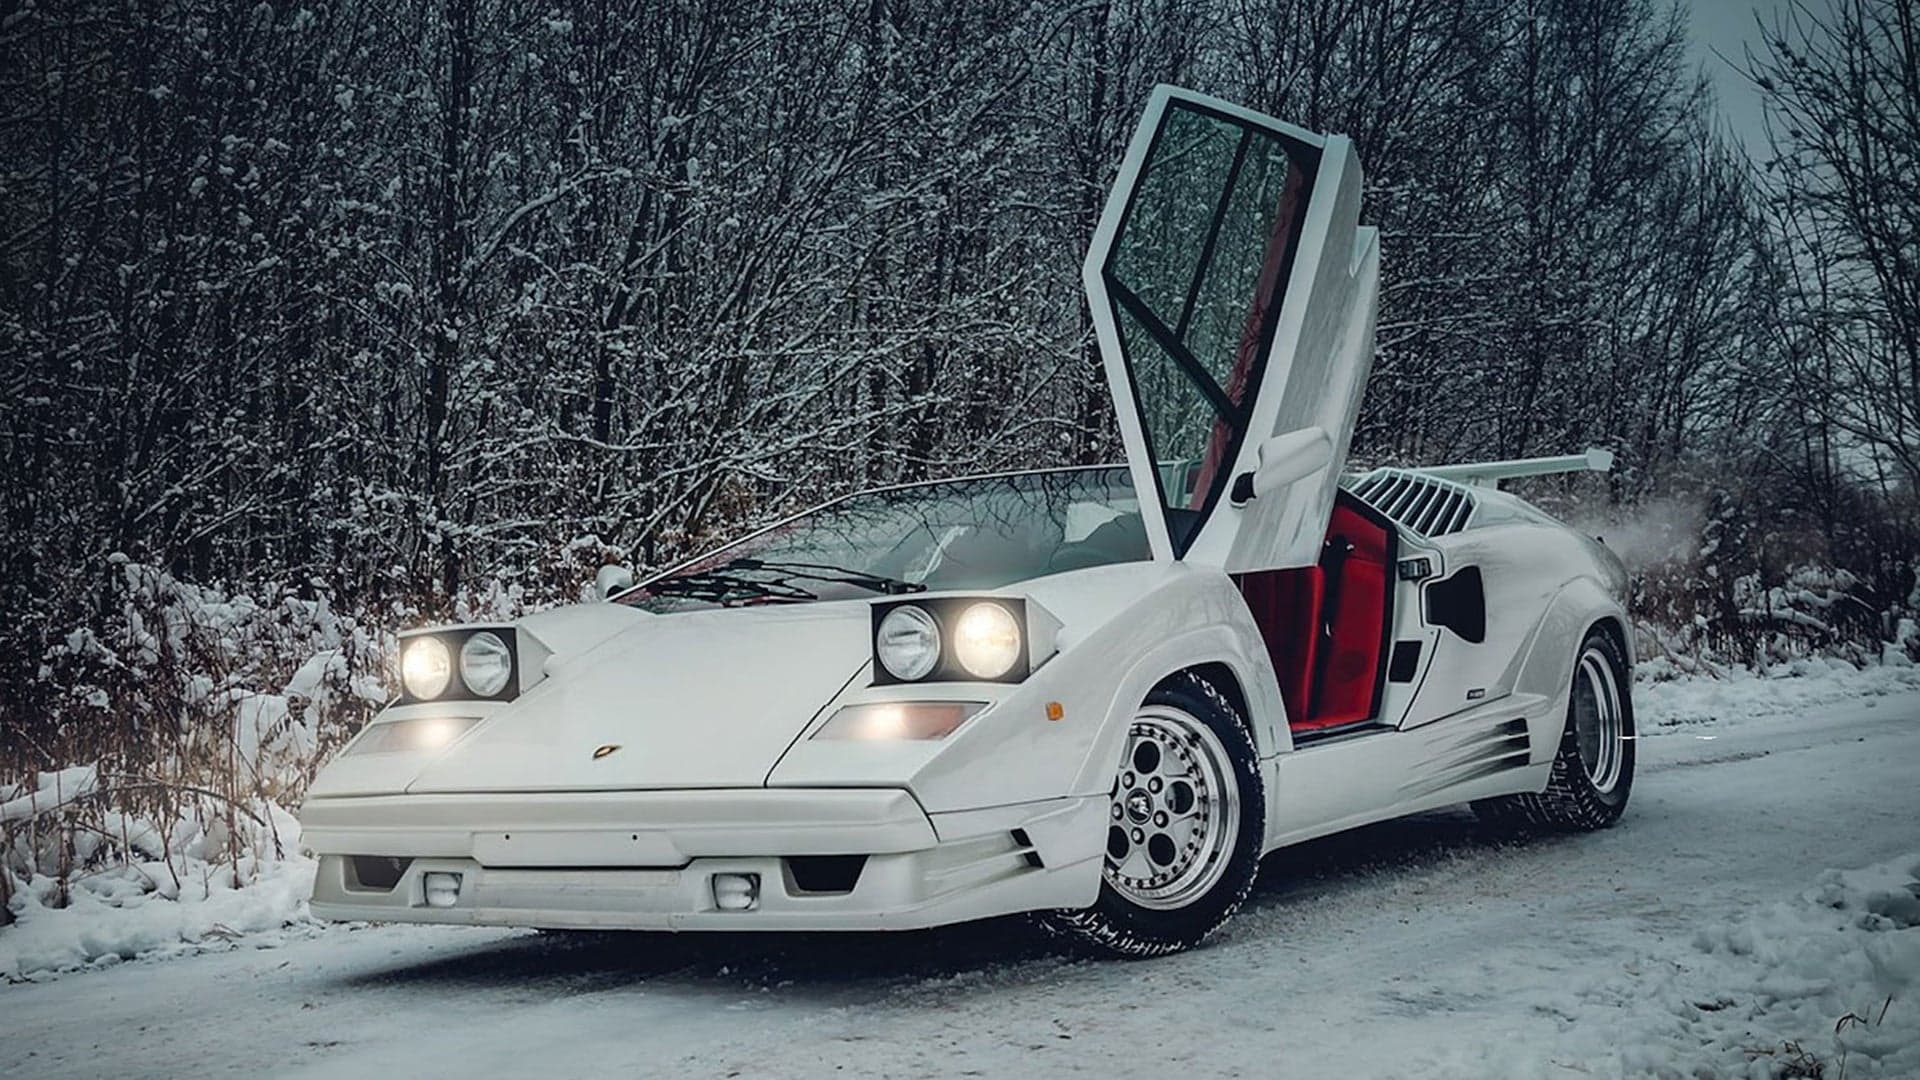 This Time-Capsule 1991 Lamborghini Countach Is the Perfect (Super) Early Christmas Present